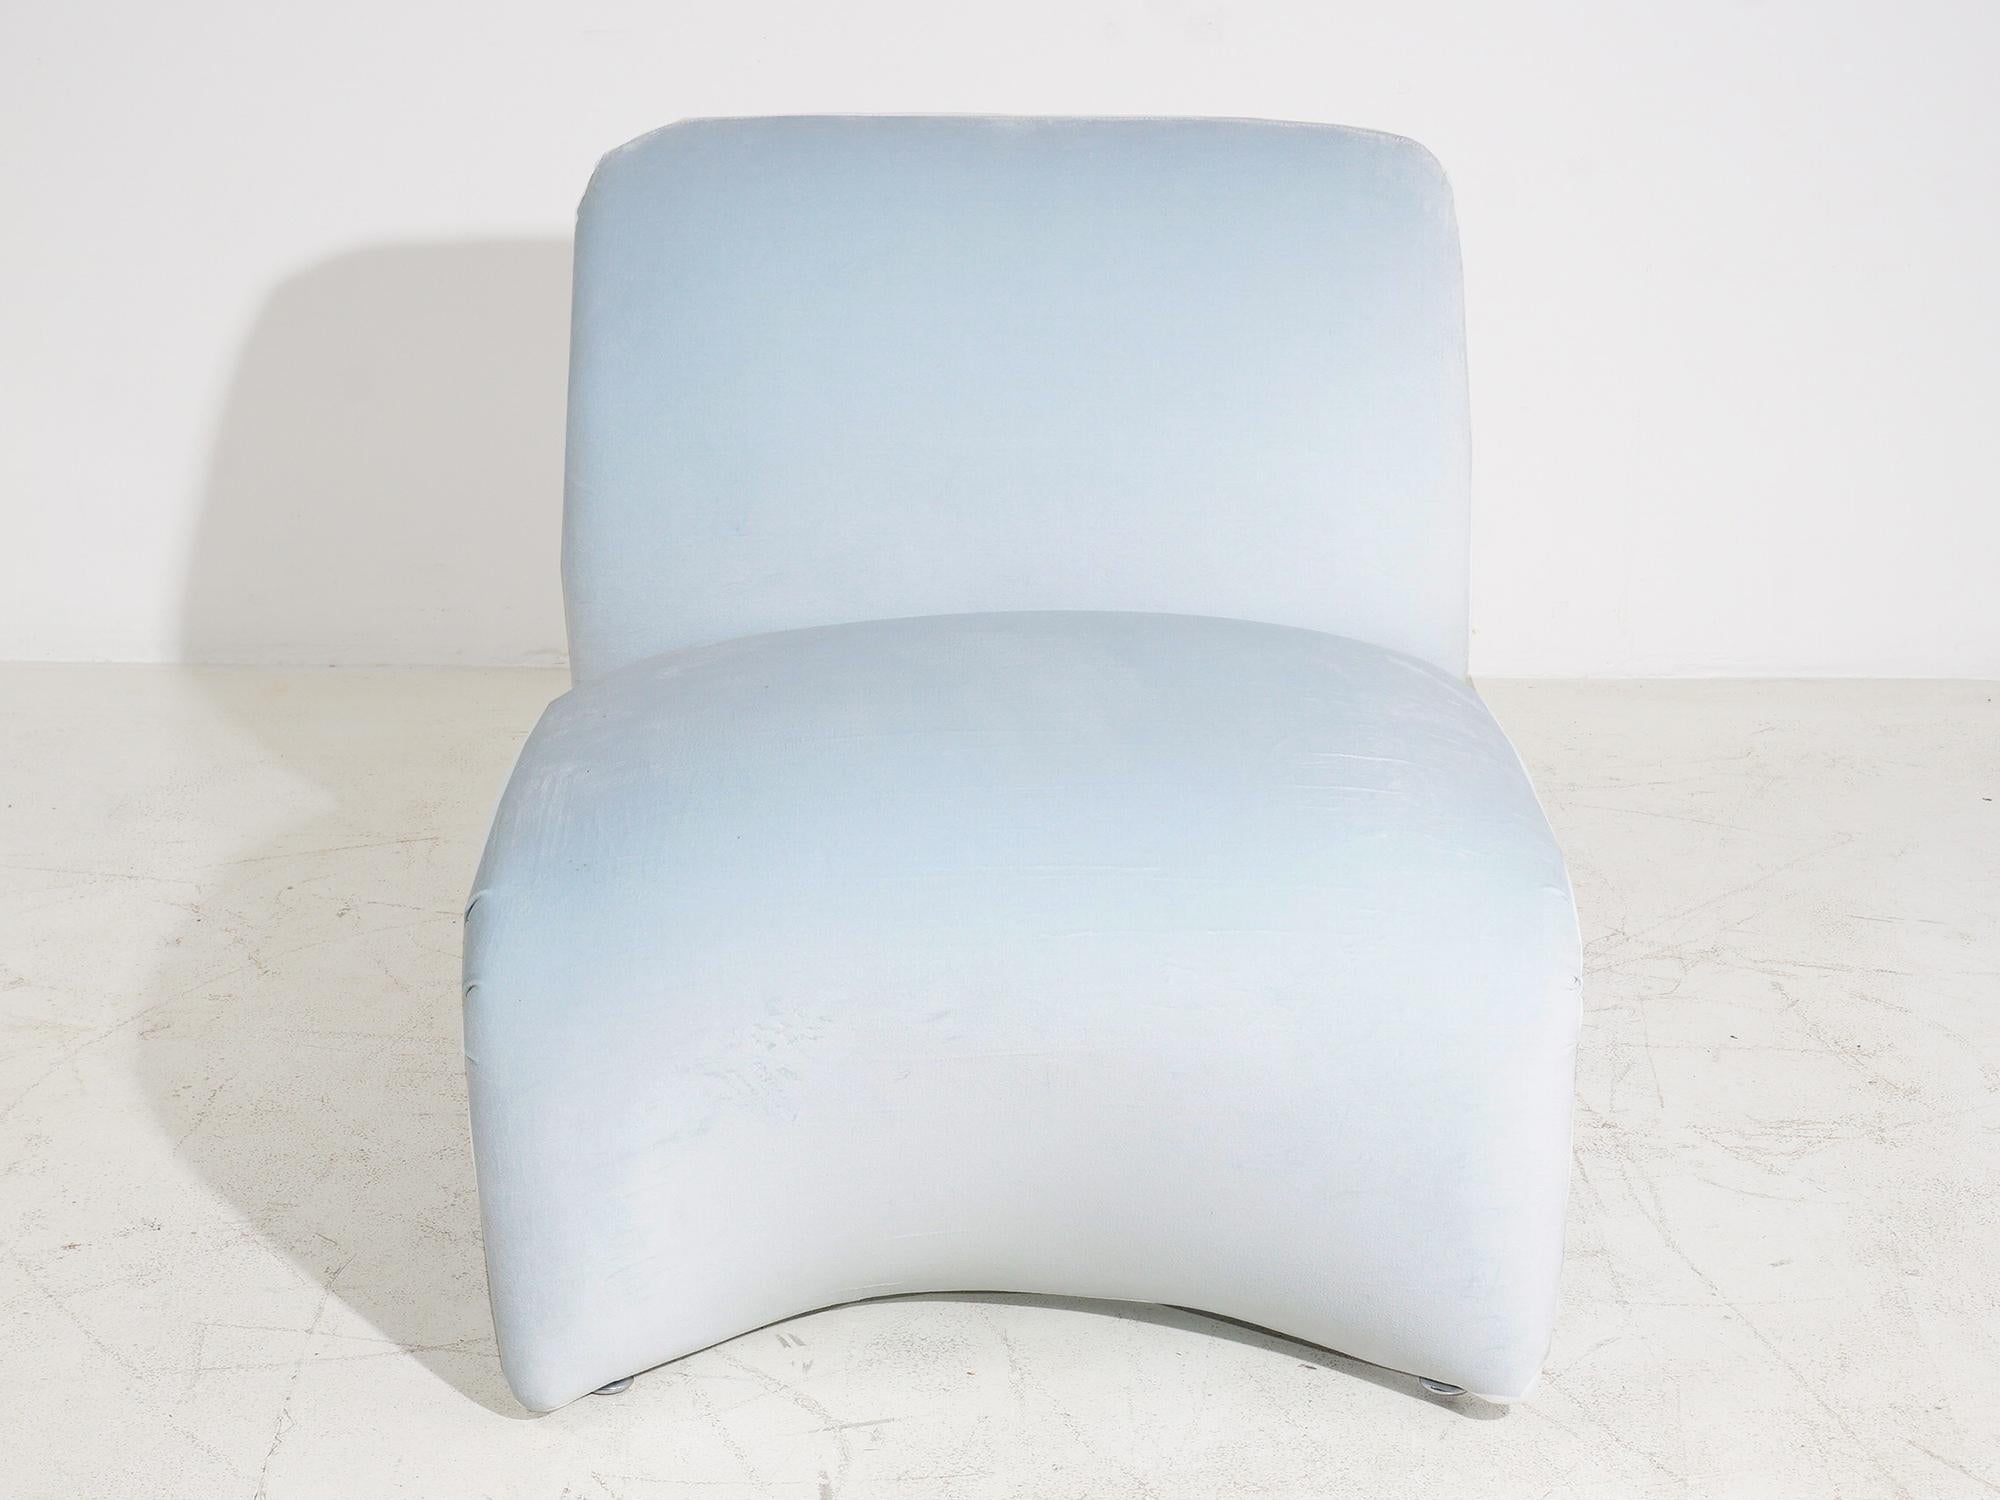 Kick back in this low sculptural lounger and look sublime from every angle. A shape like this was no doubt born circa 1960s, but the baby blue velvet upholstery is brand new. 

- 26.5